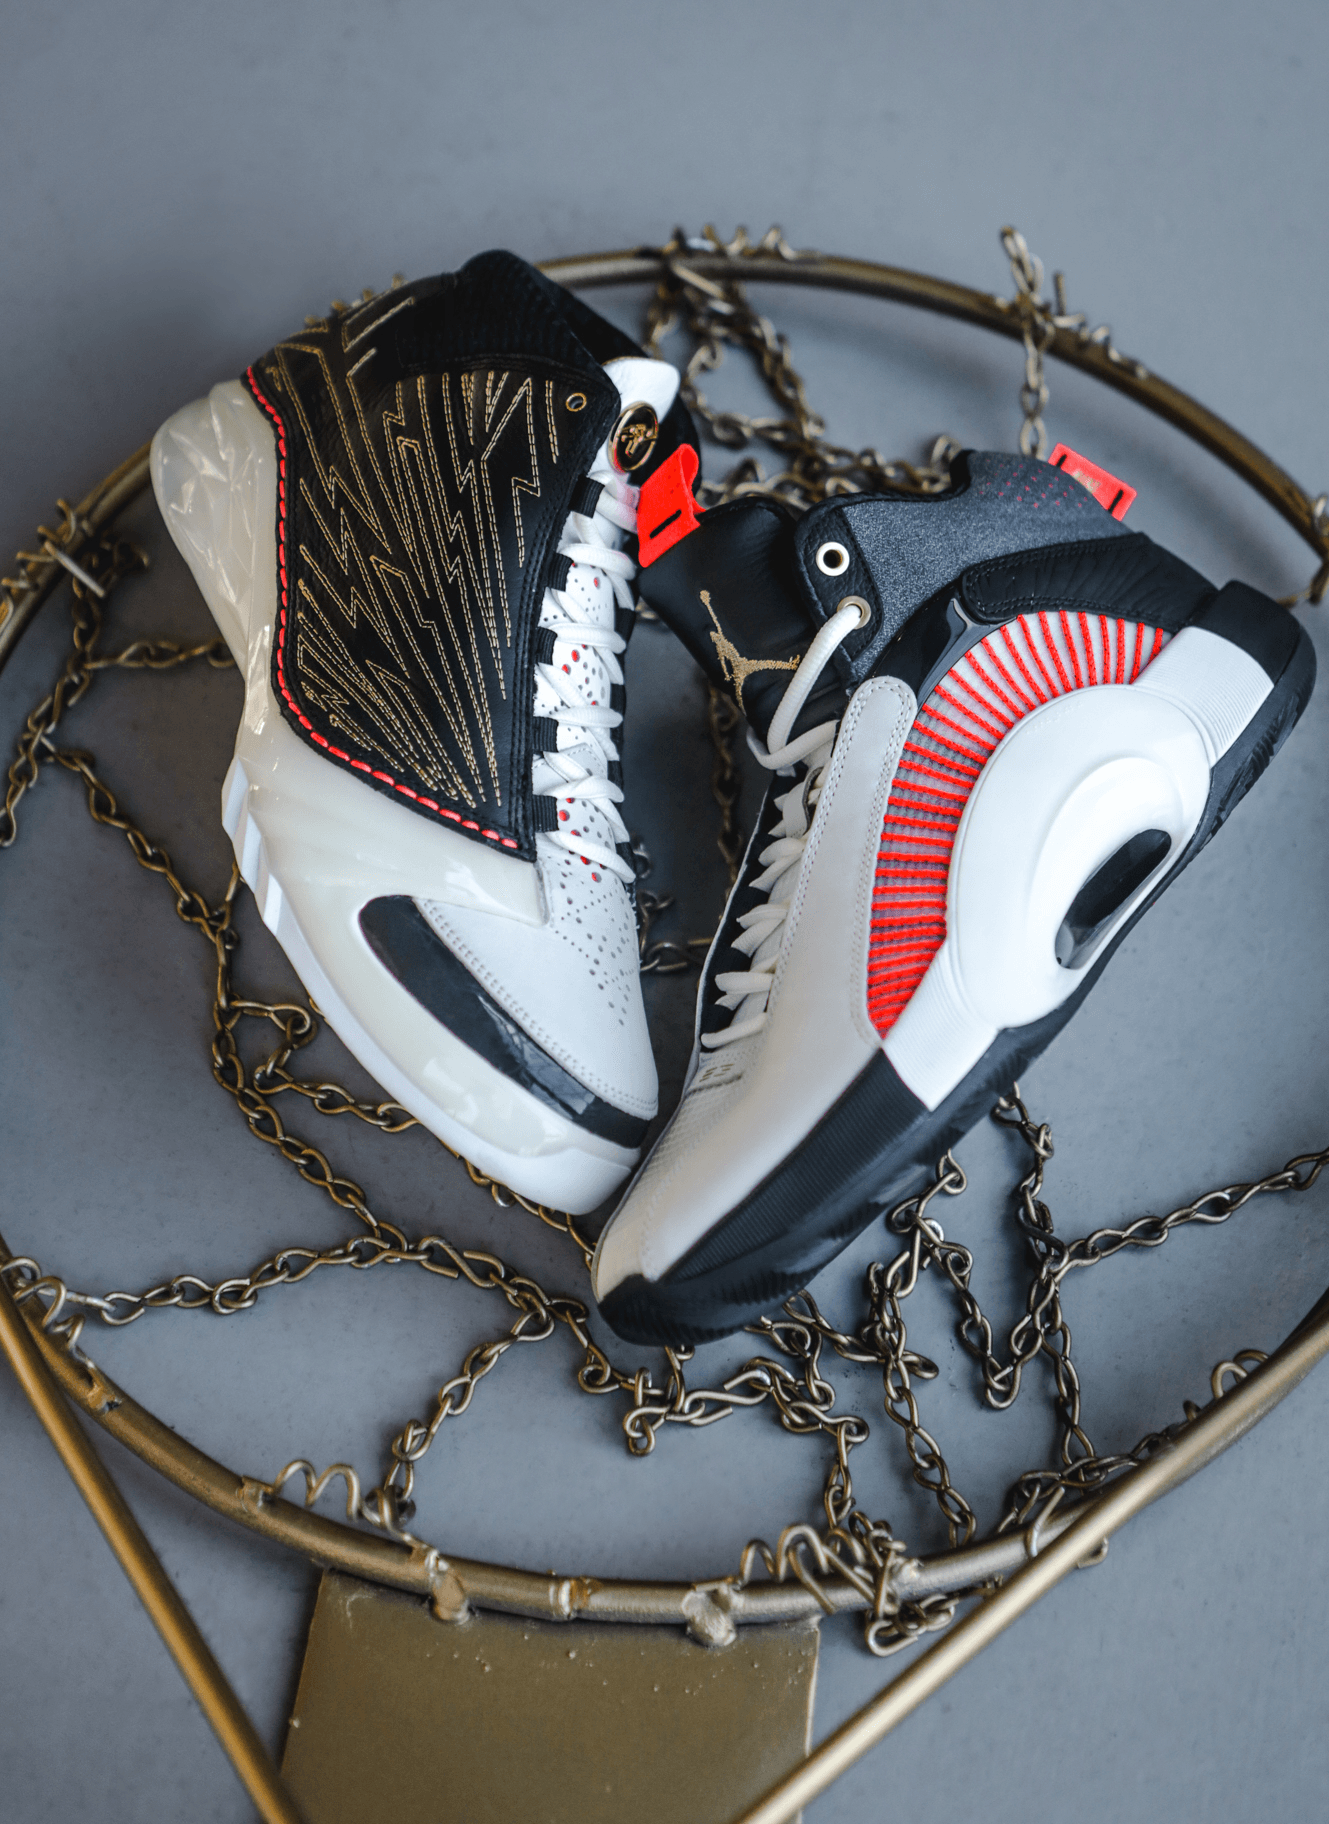 TITAN unveils first-ever collaboration with Jordan Brand